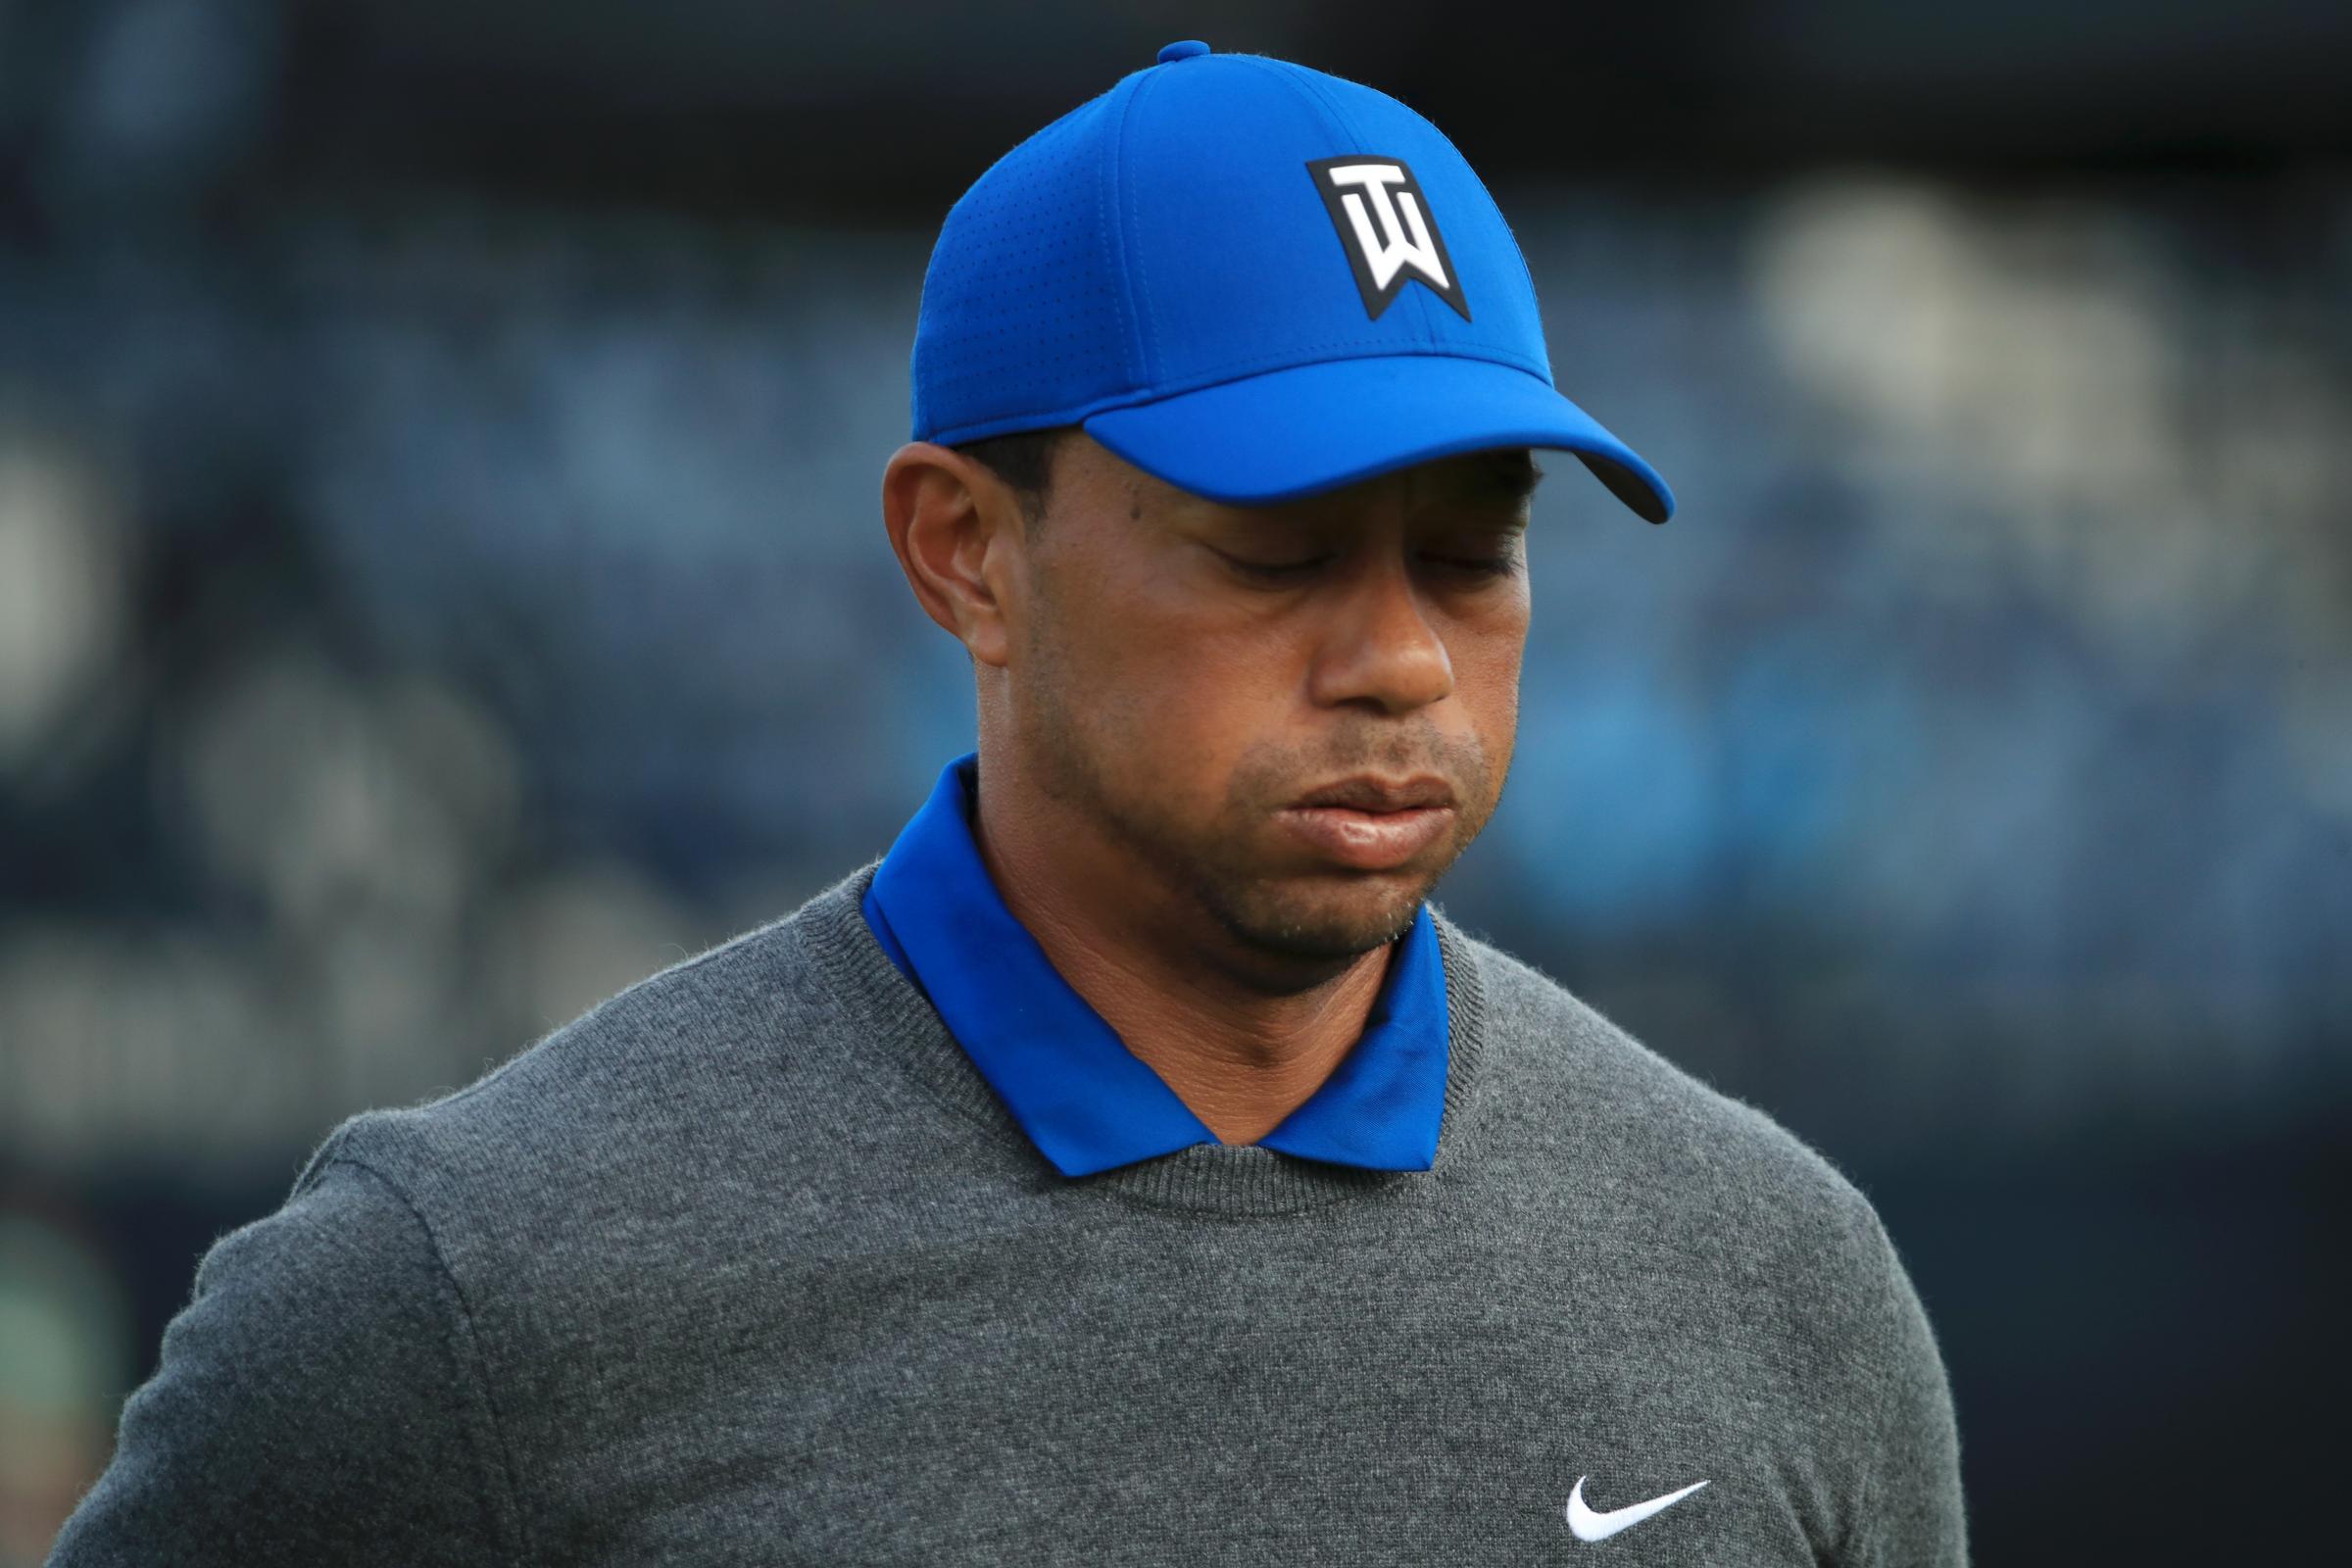 Tiger Woods says I'll give it a go at BMW Championship